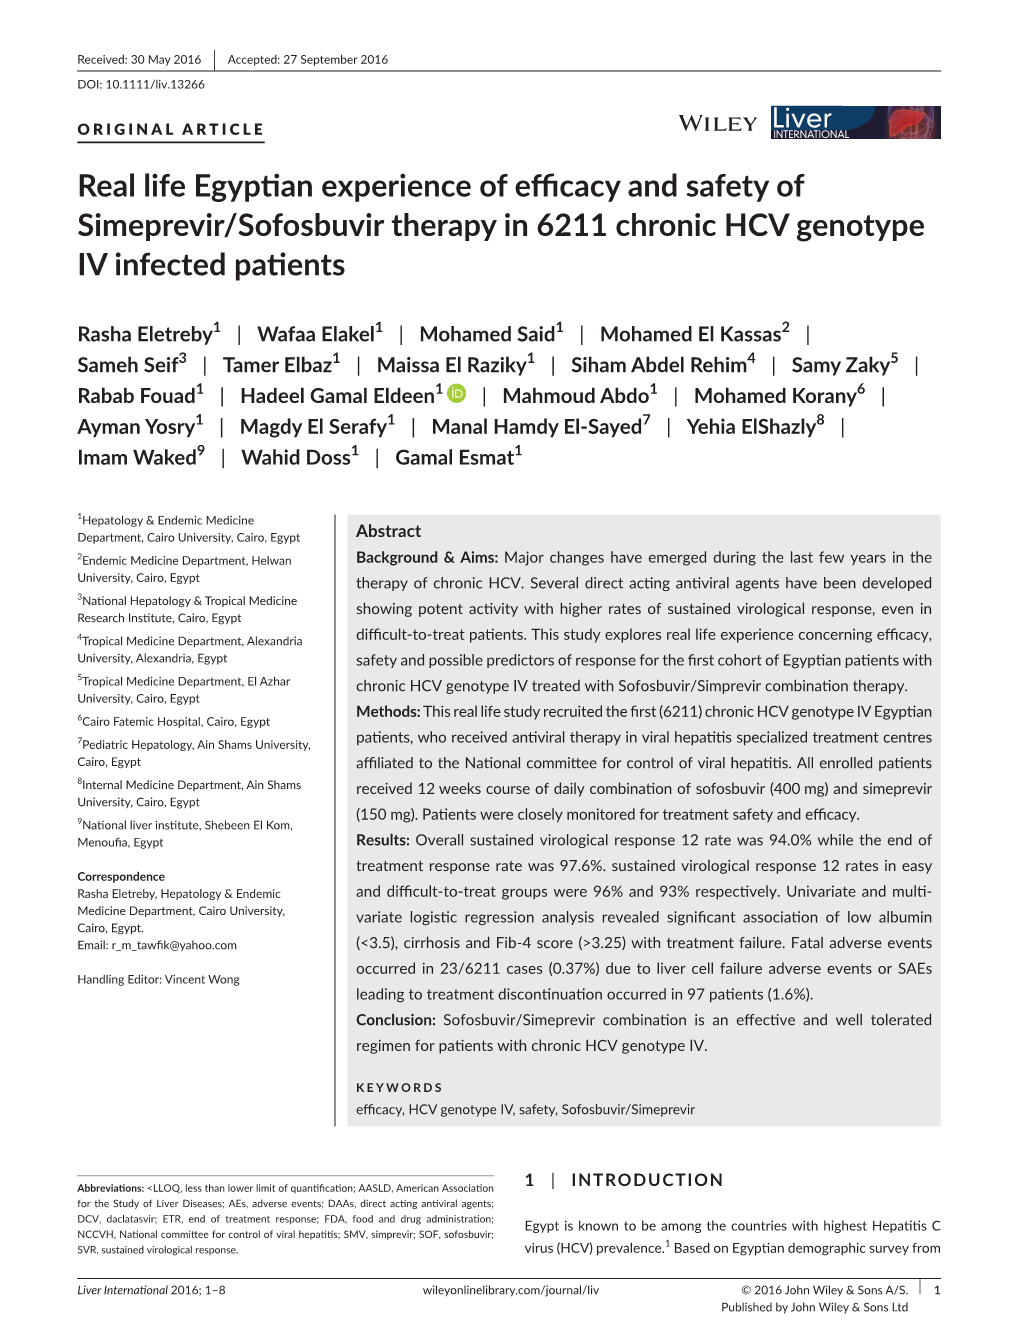 Real Life Egyptian Experience of Efficacy and Safety of Simeprevir&